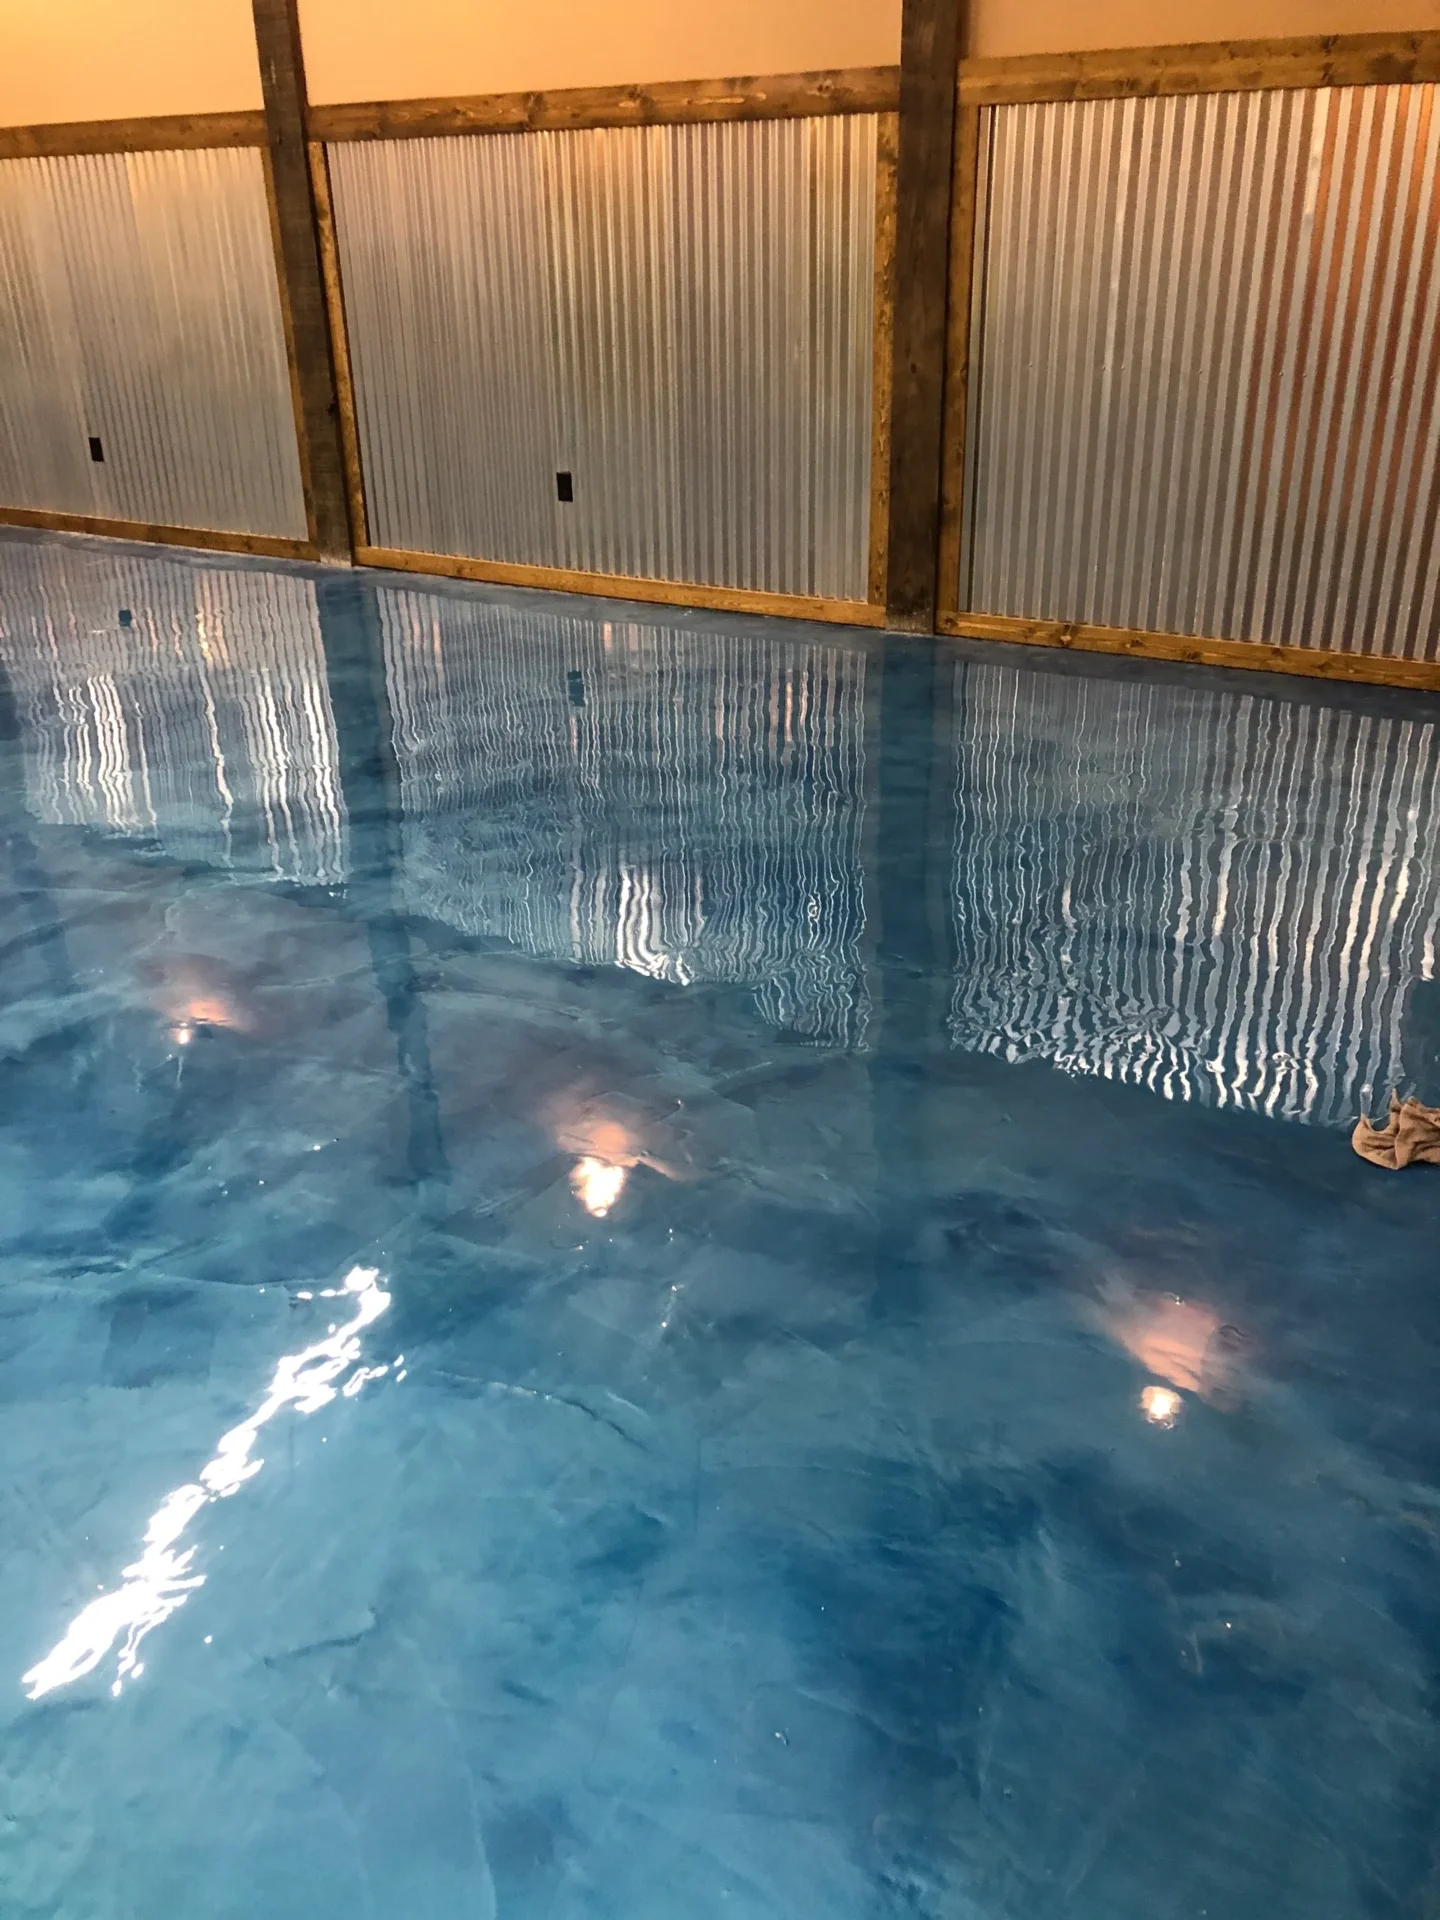 A pool with water on the ground and lights